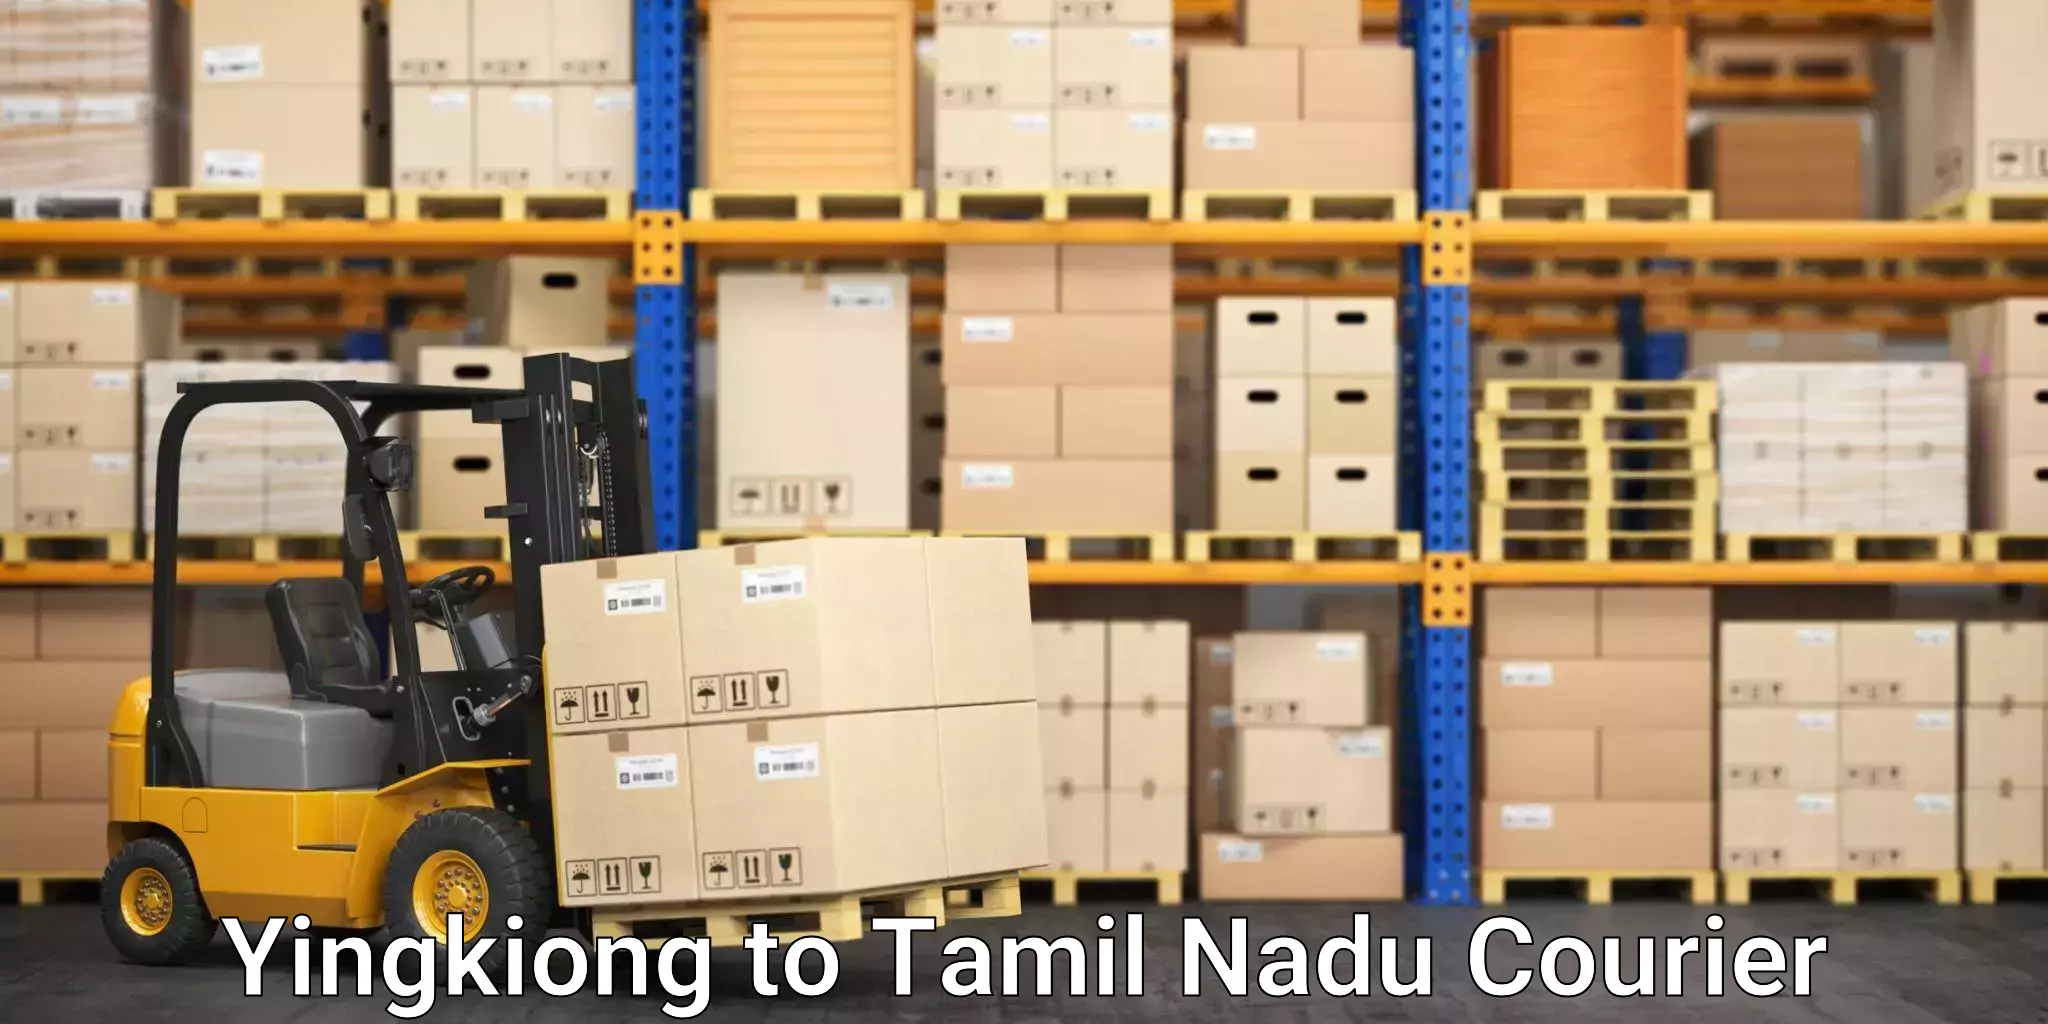 Multi-national courier services Yingkiong to Thiruthuraipoondi